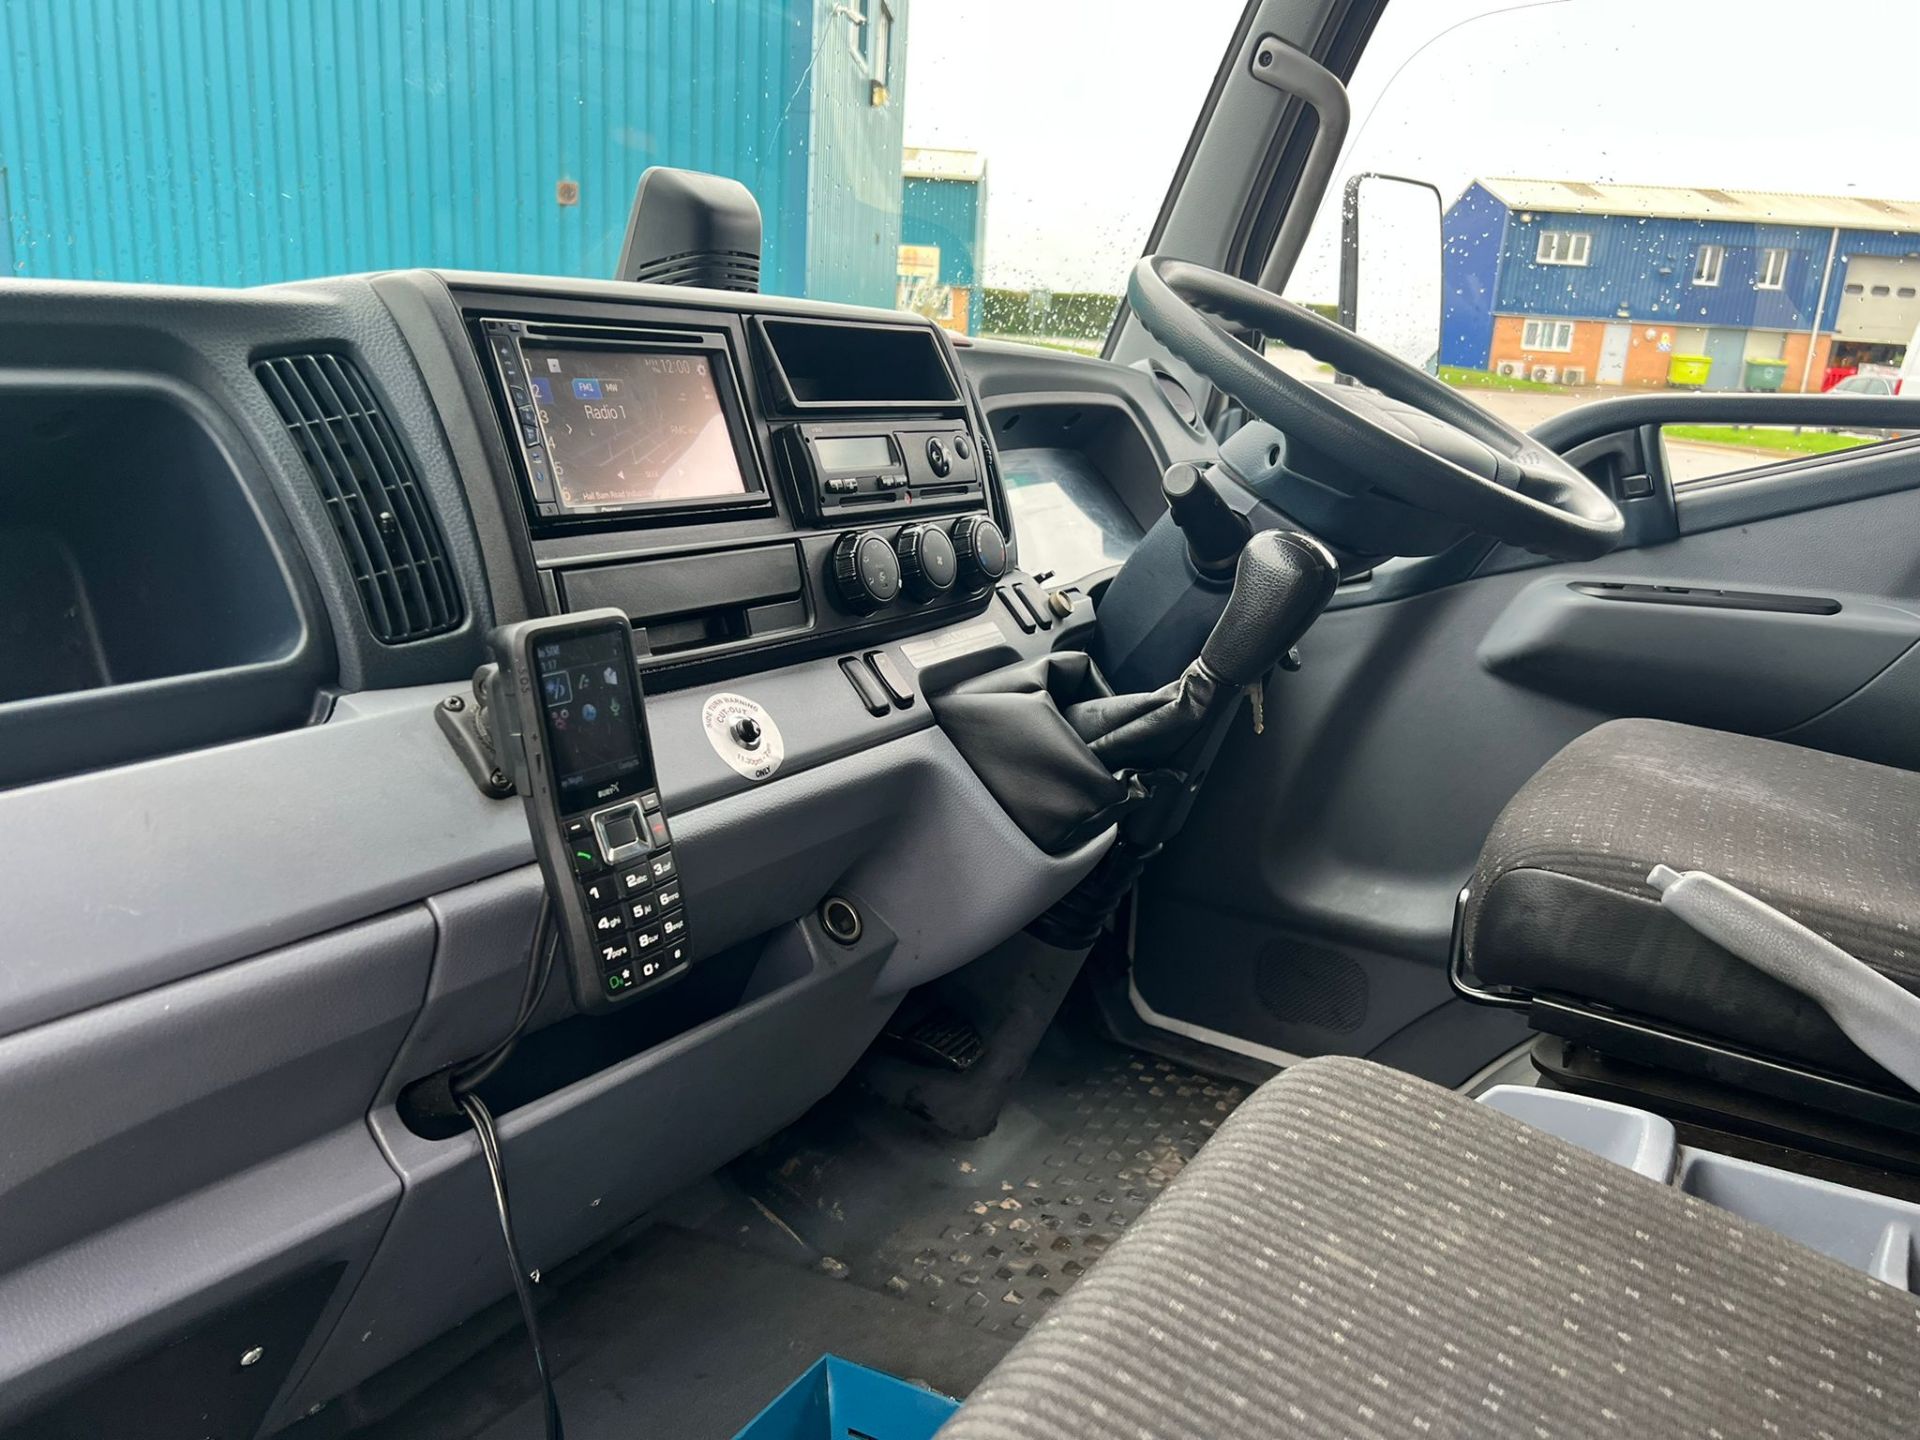 (RESERVE MET)Mitsubishi Fuso Canter 7C15 38 3.0 TD - 7.5 Curtainsider - 2018 18 Reg-69599 Miles Only - Image 13 of 15